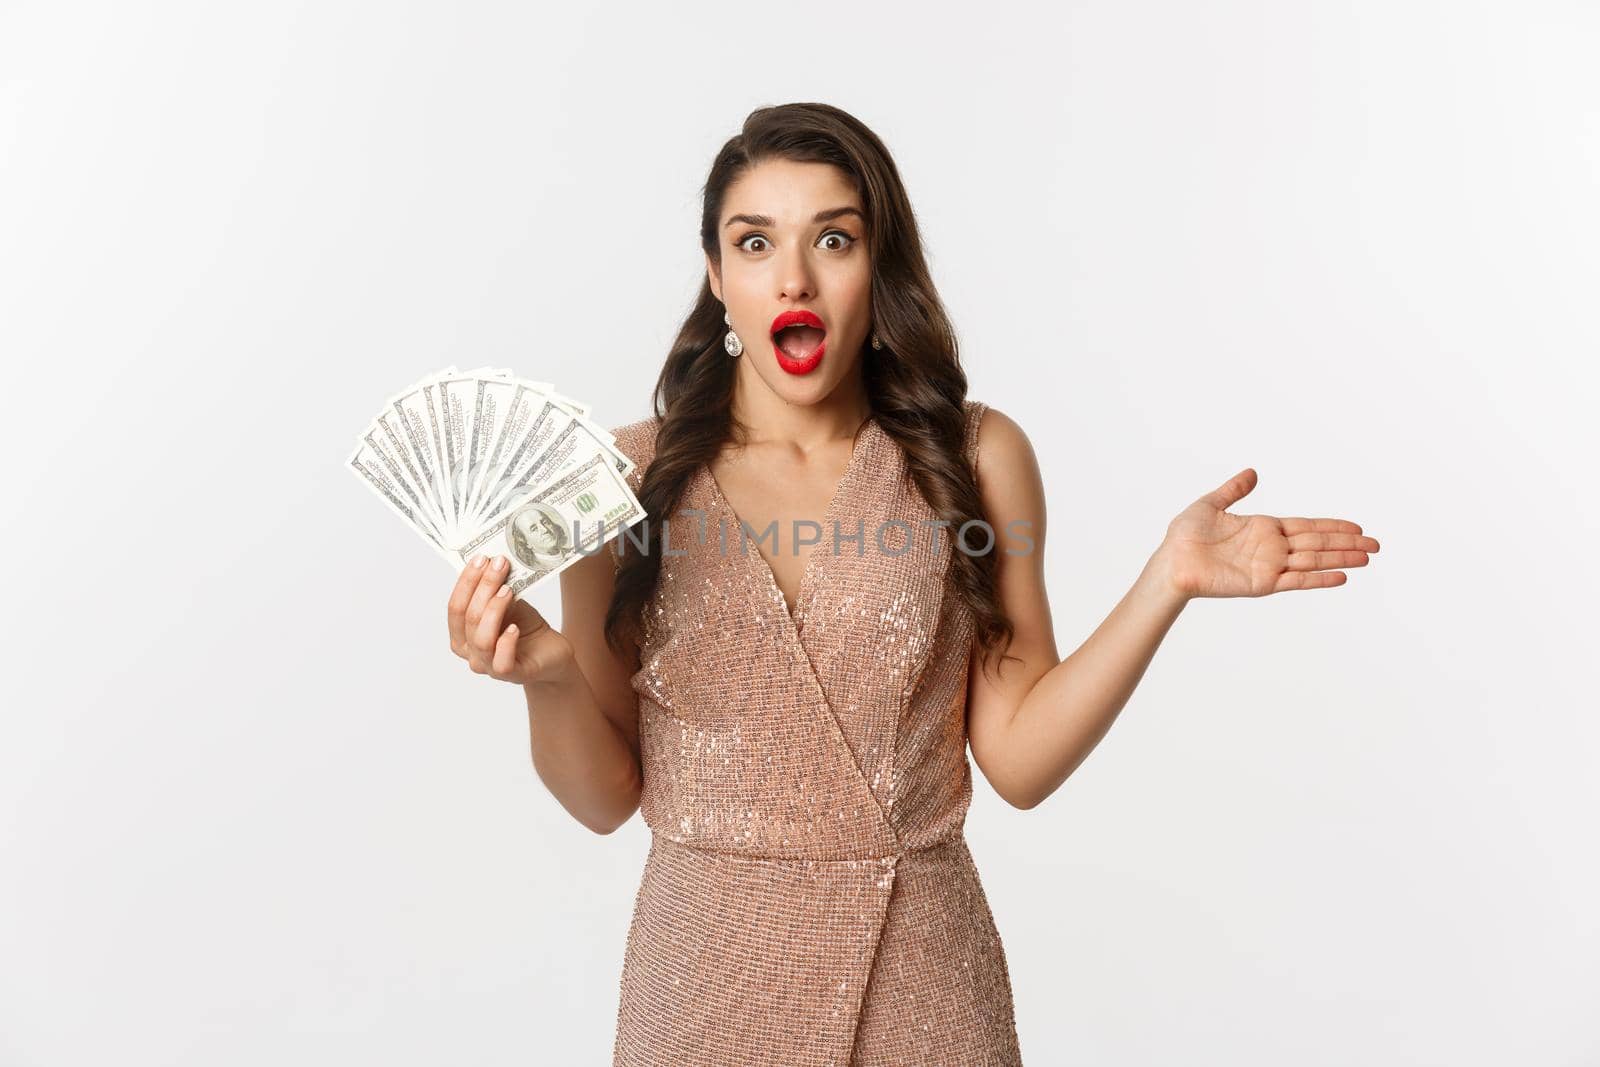 Shopping concept. Elegant woman in glamour dress holding money and looking surprised. winning prize, standing over white background.